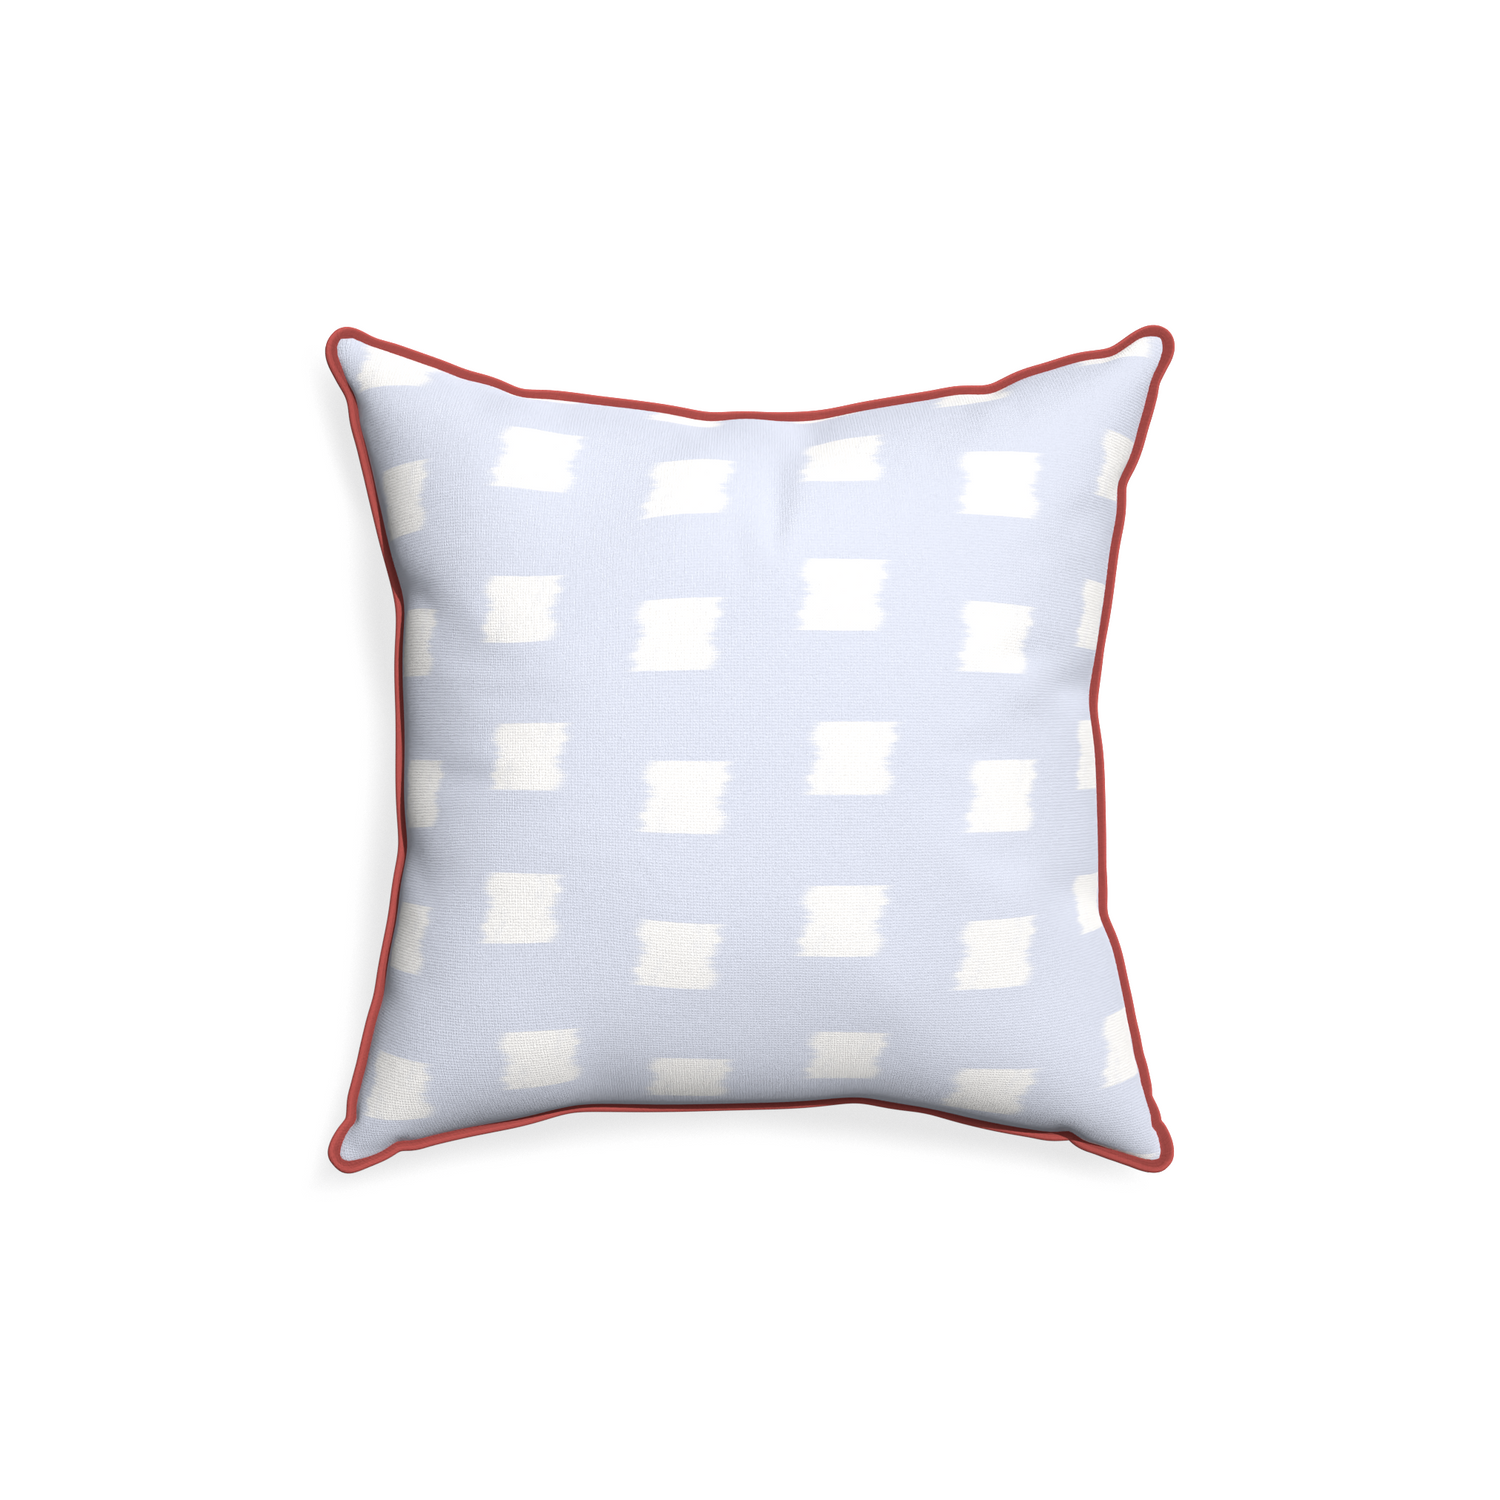 18-square denton custom pillow with c piping on white background